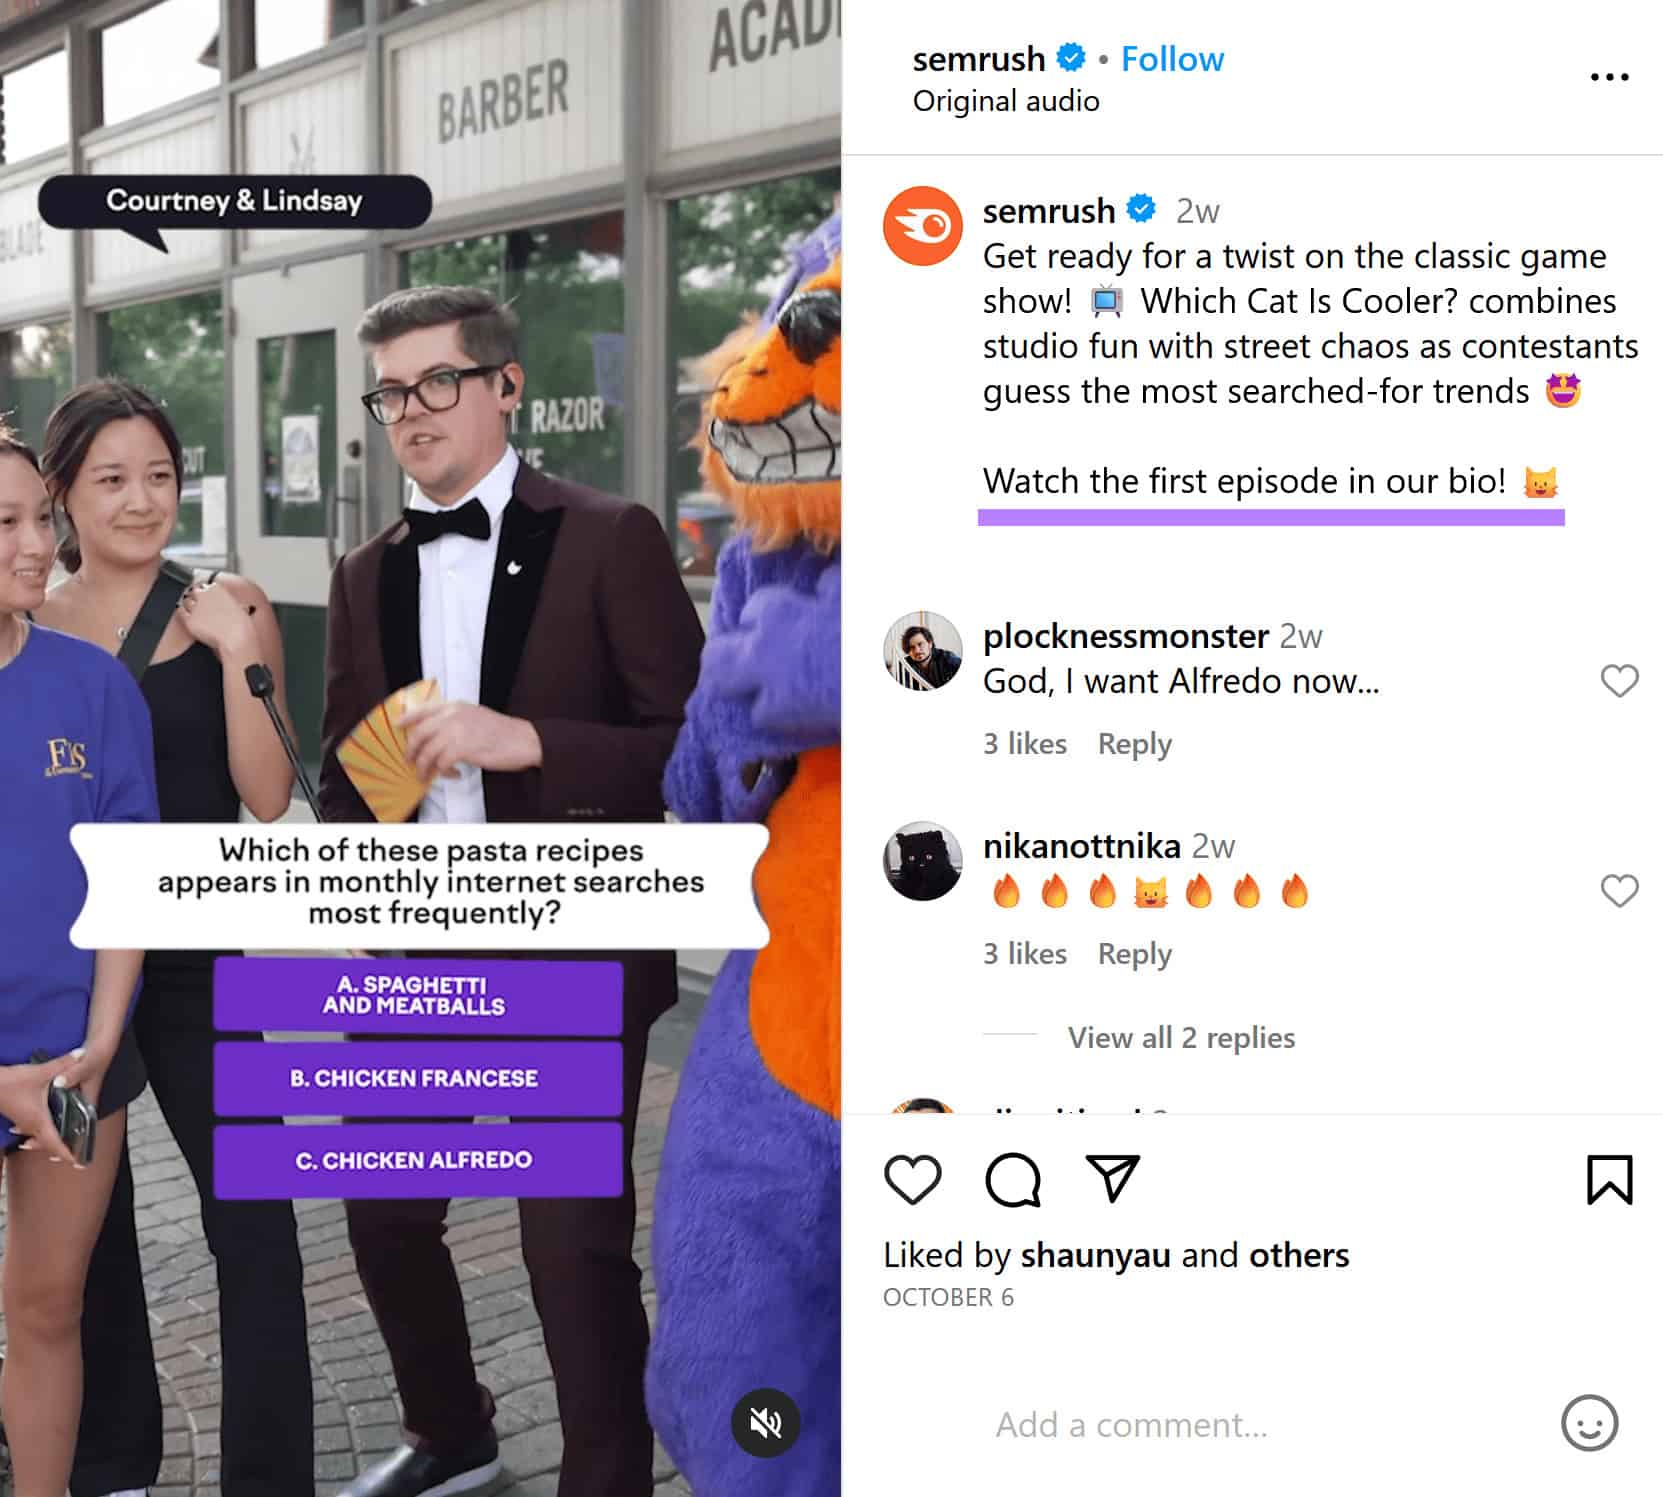 Semrush's Instagram post asking users to "Watch the first episode in our bio!"